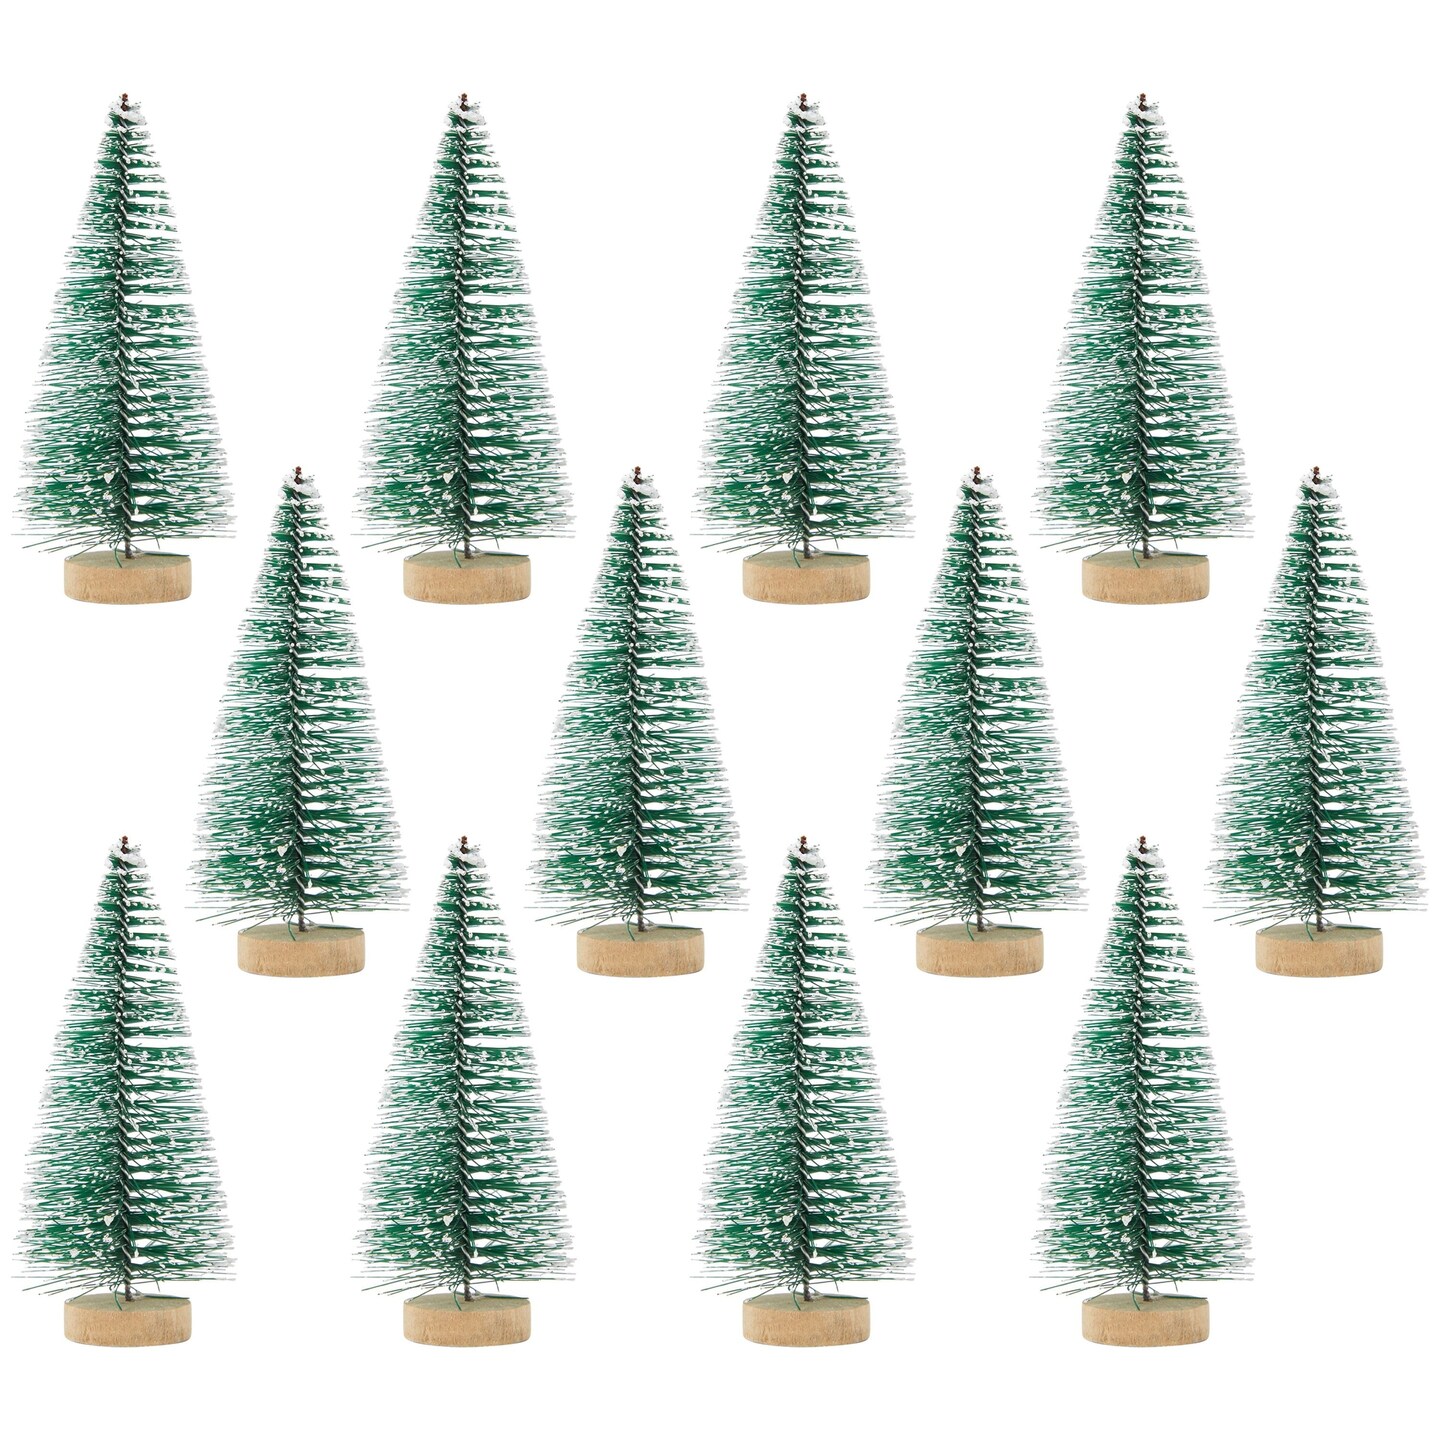 Mini Christmas Tree, Set of 12 Sizes Artificial Small Tiny Pine Tree with  Wooden Bases, for Xmas Holiday Room Tabletop Decor